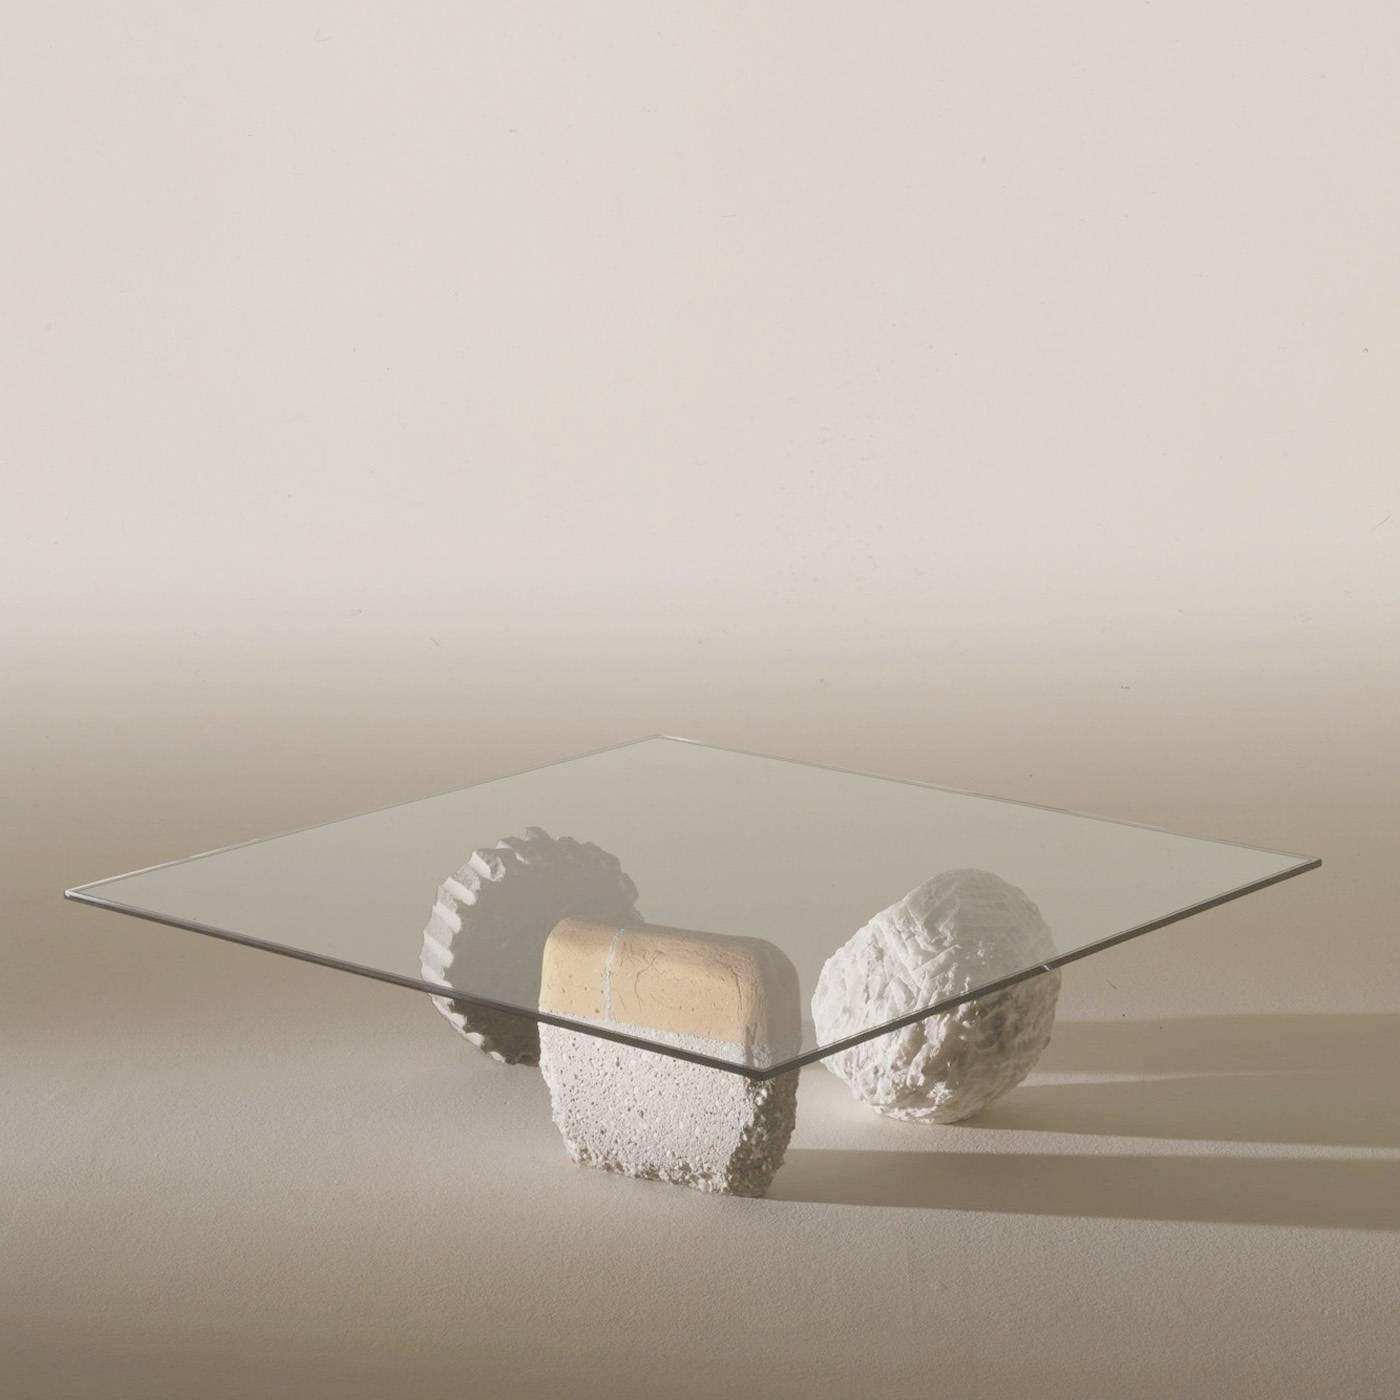 Inspired by the youthful memories of the designer, materials is a table base made of fragments from the past: a sphere of alabaster, a cogged wheel made of sandstone and a fragment of wall of brick and cement, smoothed by river water over decades.